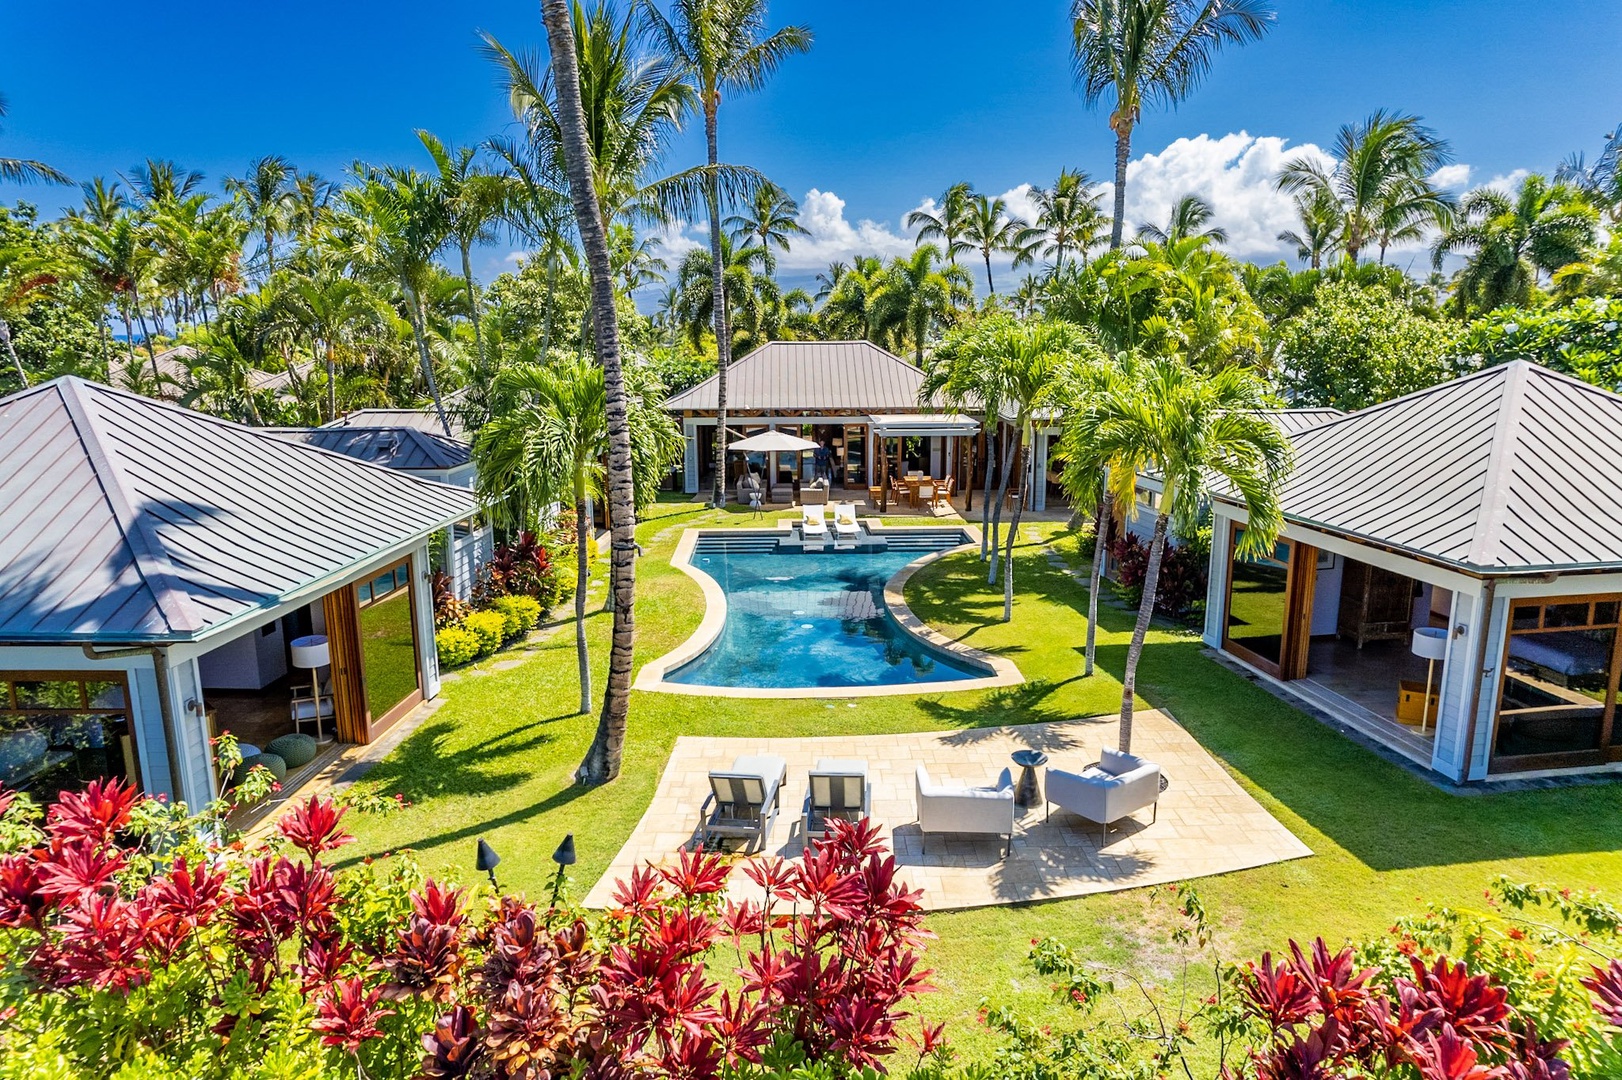 Kamuela Vacation Rentals, 3BD Na Hale 3 at Pauoa Beach Club at Mauna Lani Resort - Birds eye view of your home away from home!